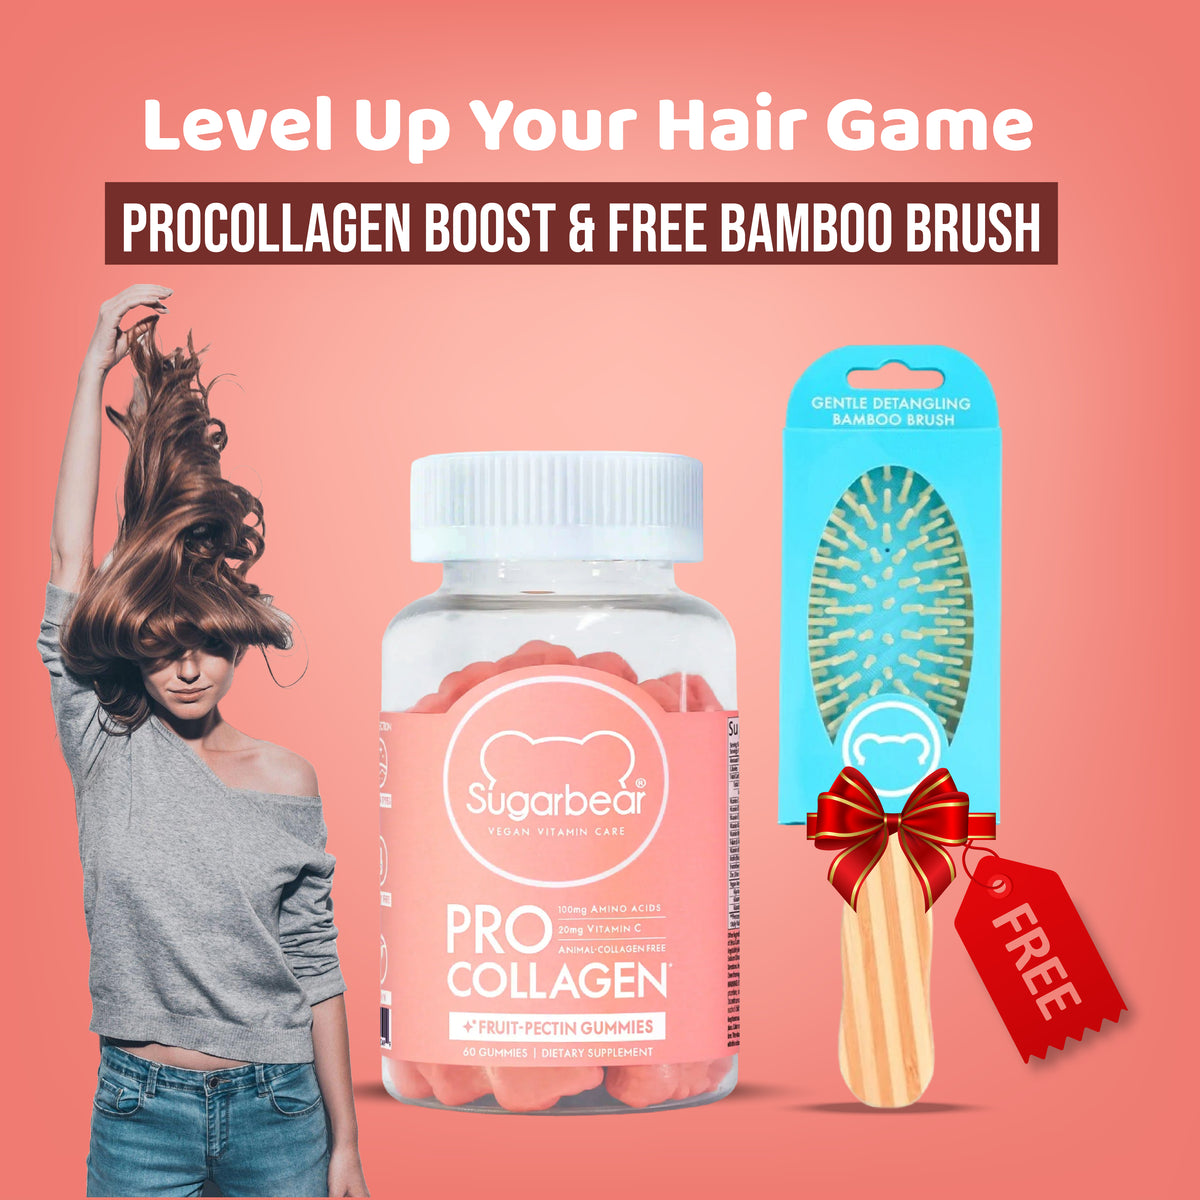 Sugarbear Pro Collagen and FREE SugarBearHair Gentle Detangling Bamboo Hair Brush Combo